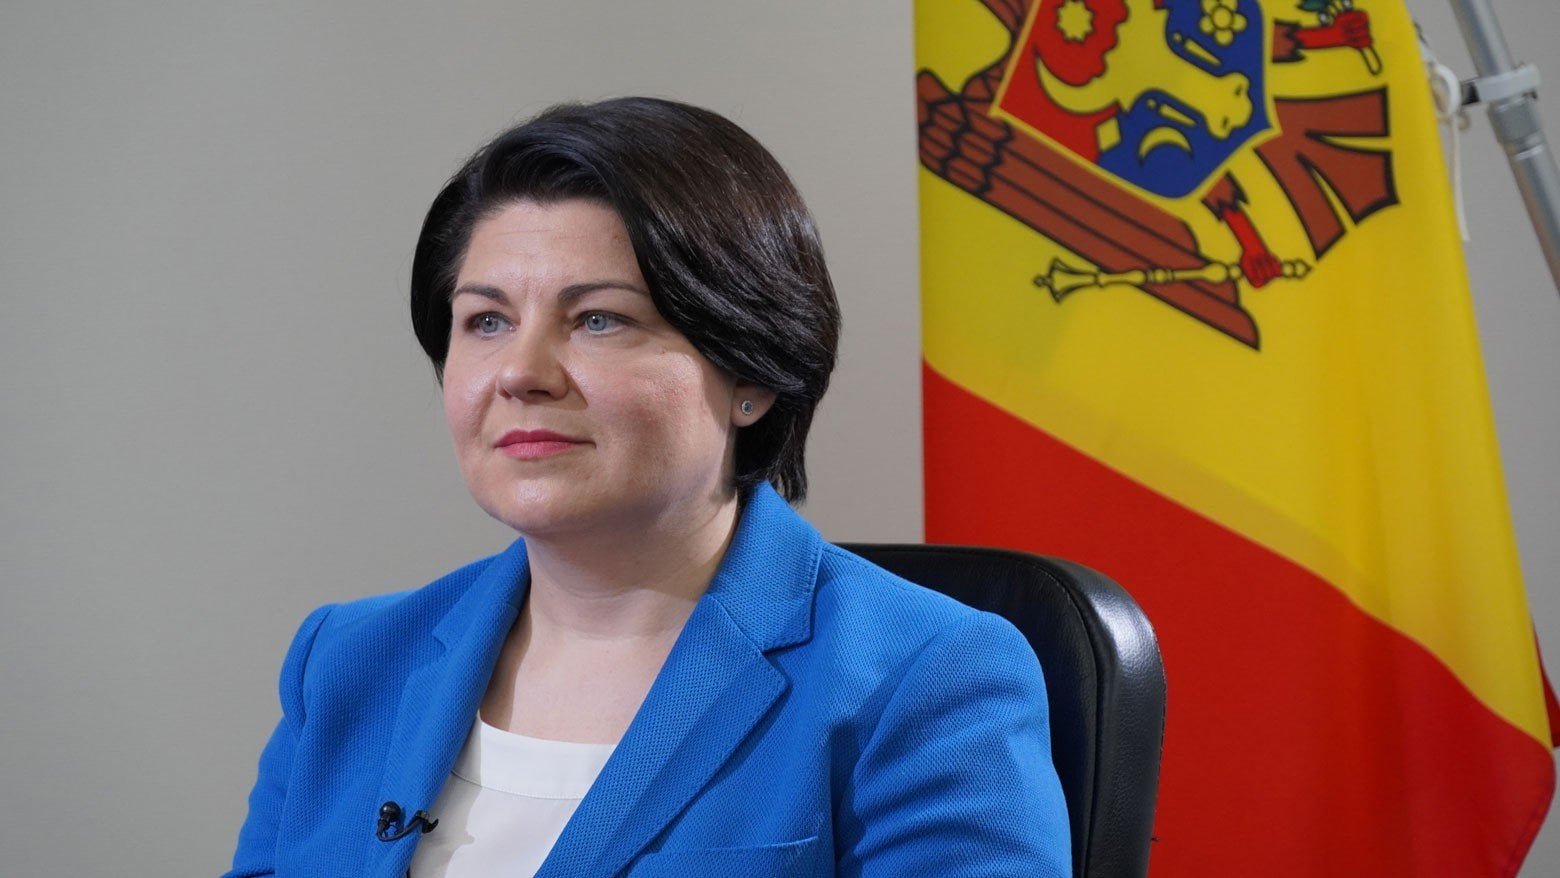 moldovan-pm-resigns-blaming-crises-caused-by-russian-aggression